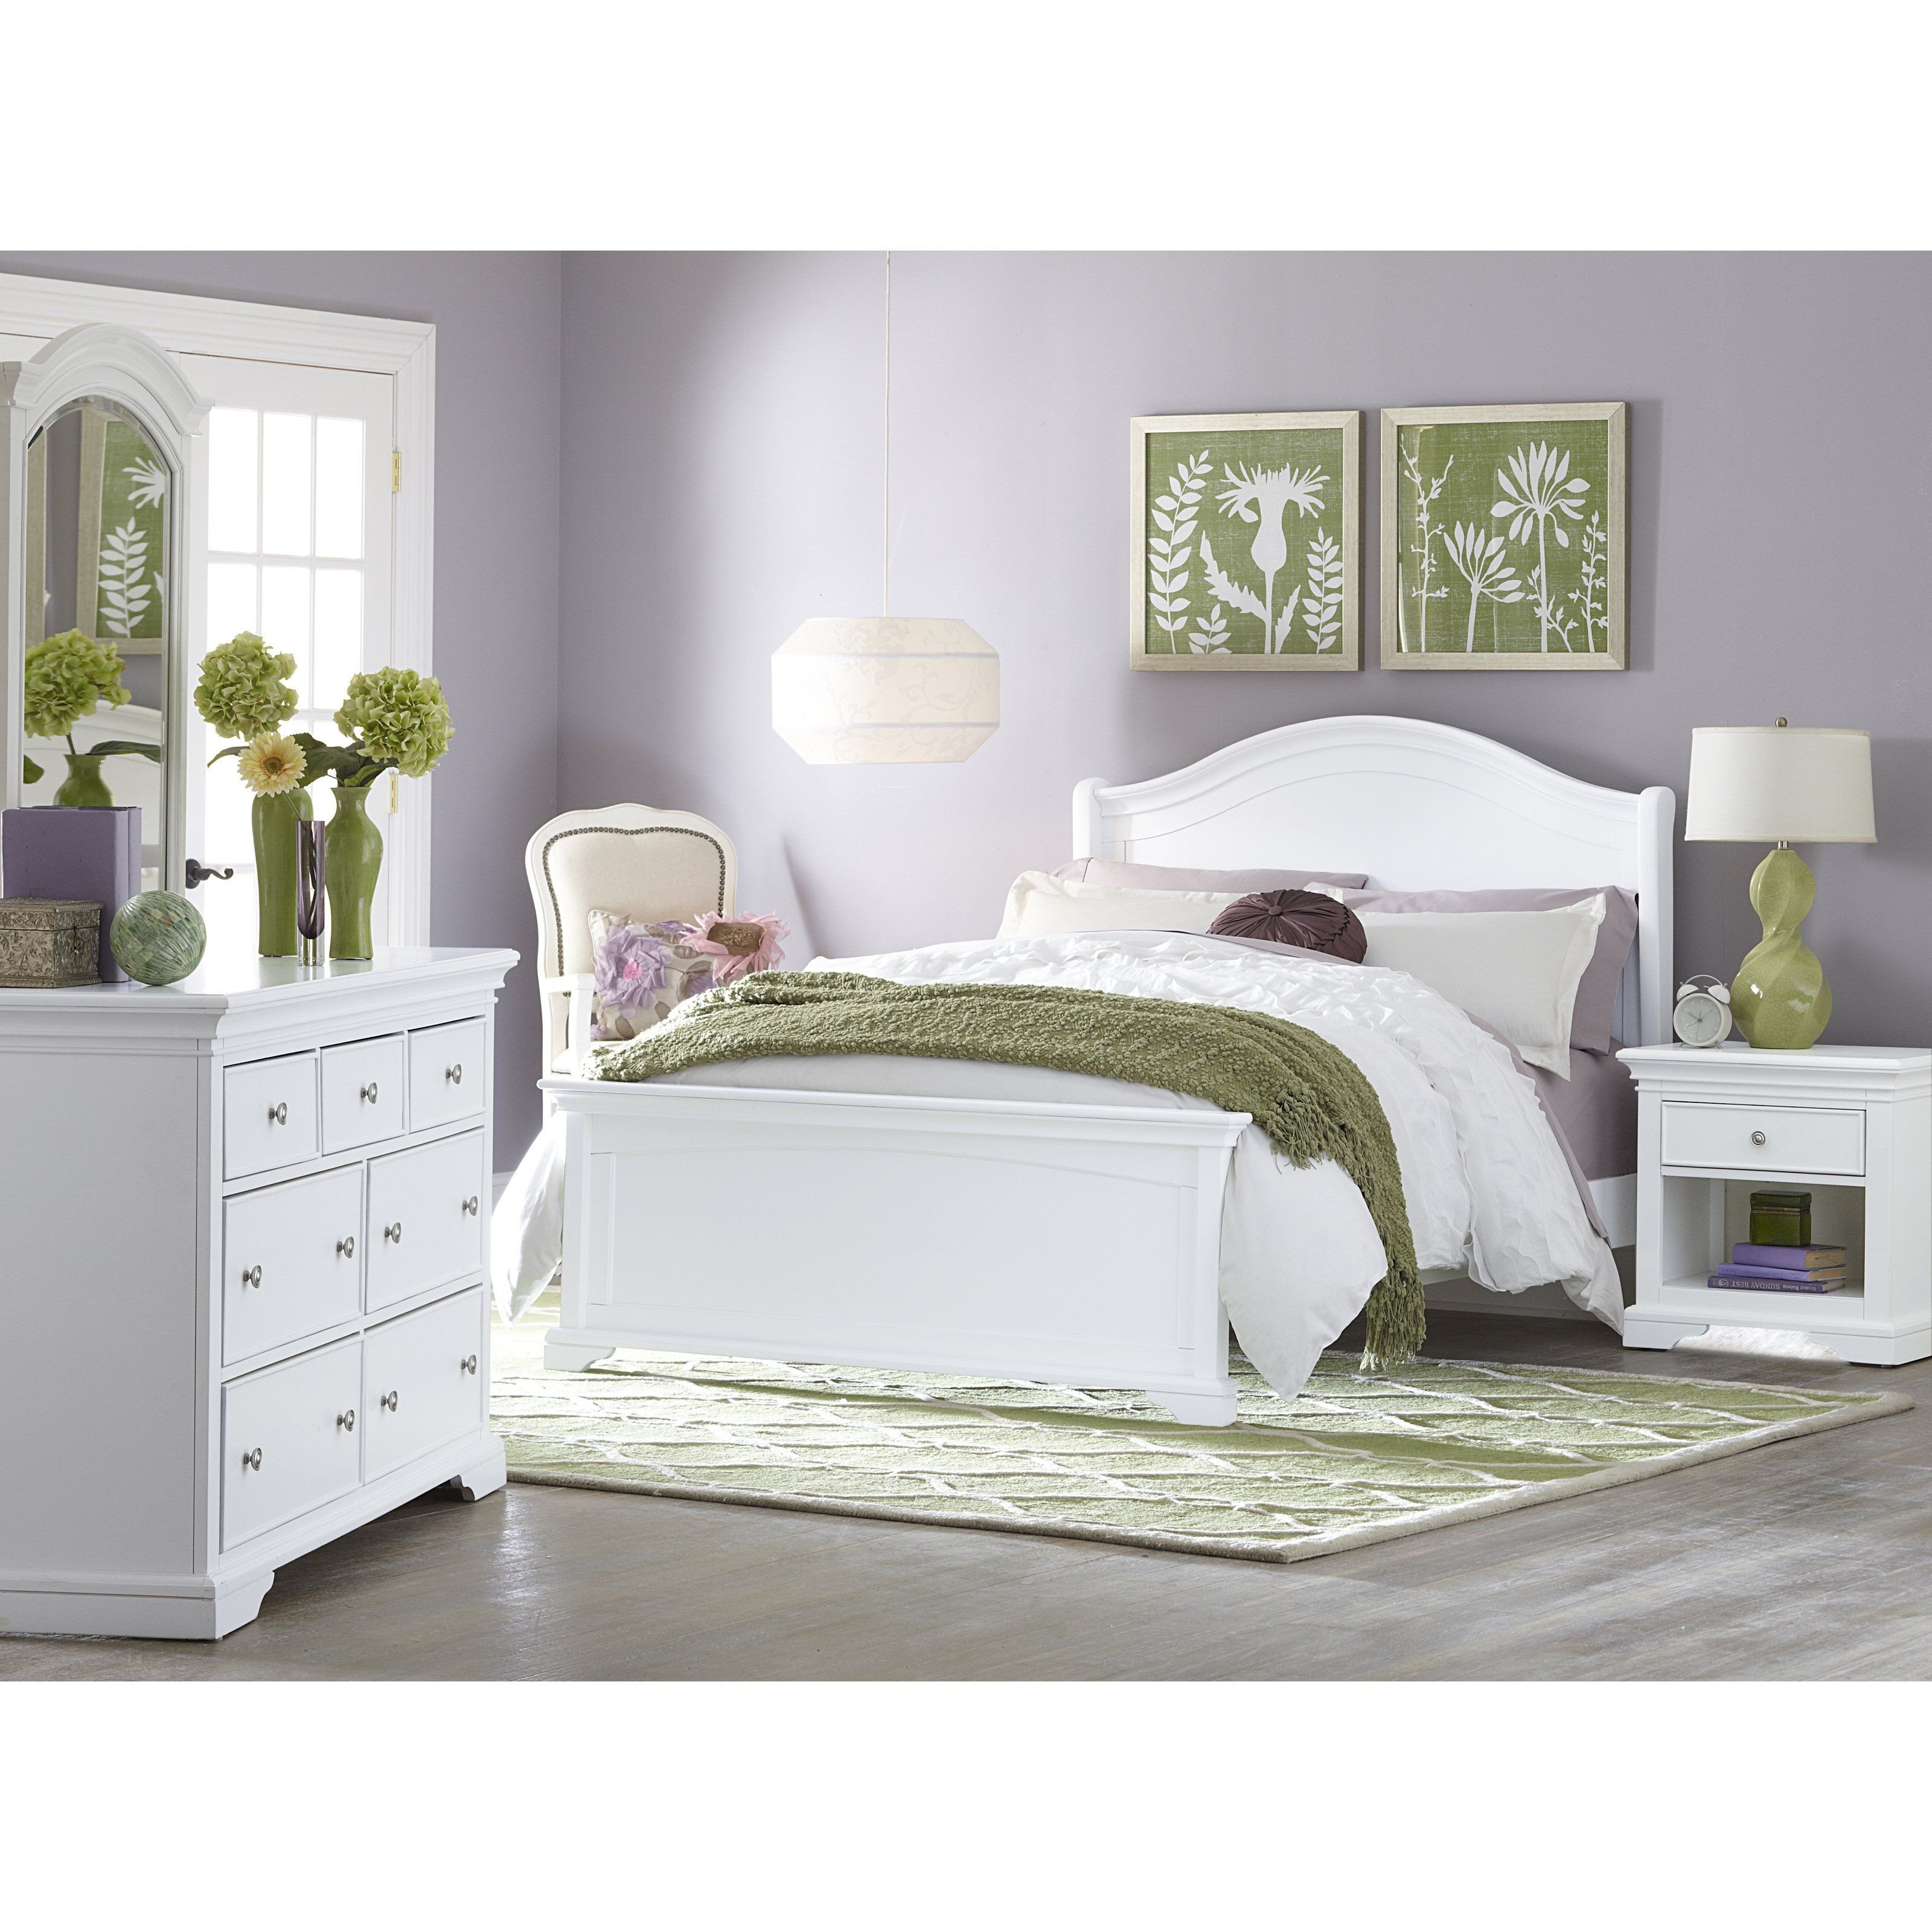 Girls Full Bedroom Set Unique Pin On Color Schemes &amp; Paint